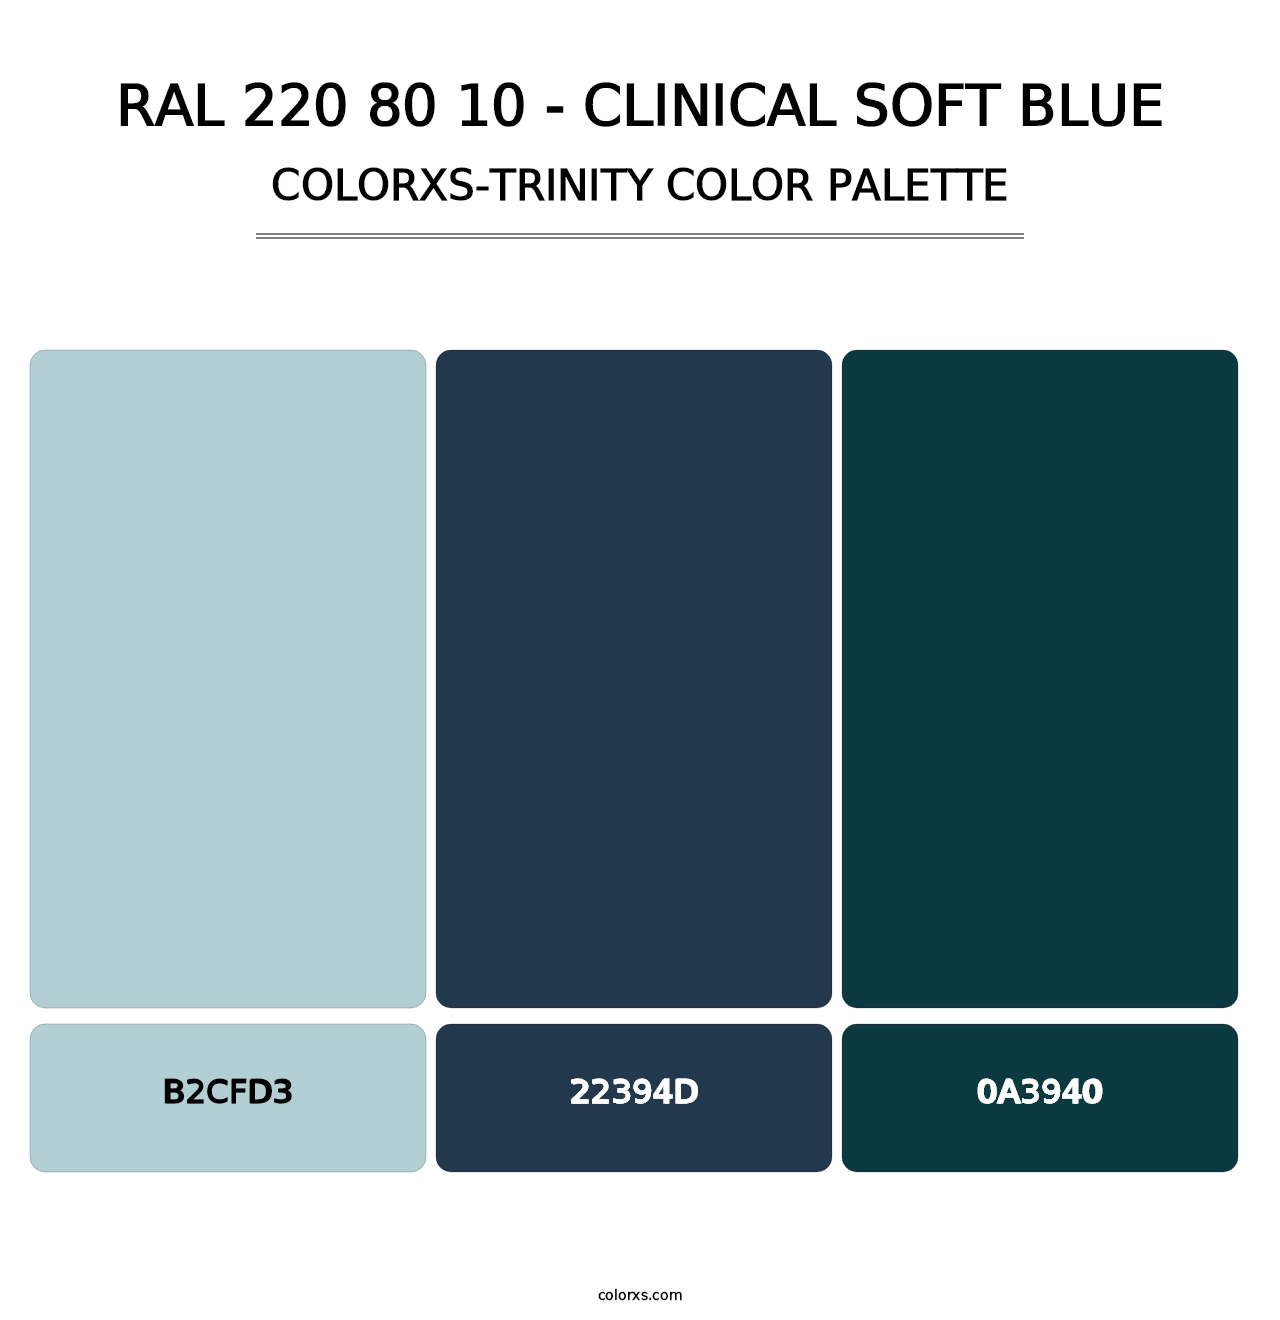 RAL 220 80 10 - Clinical Soft Blue - Colorxs Trinity Palette